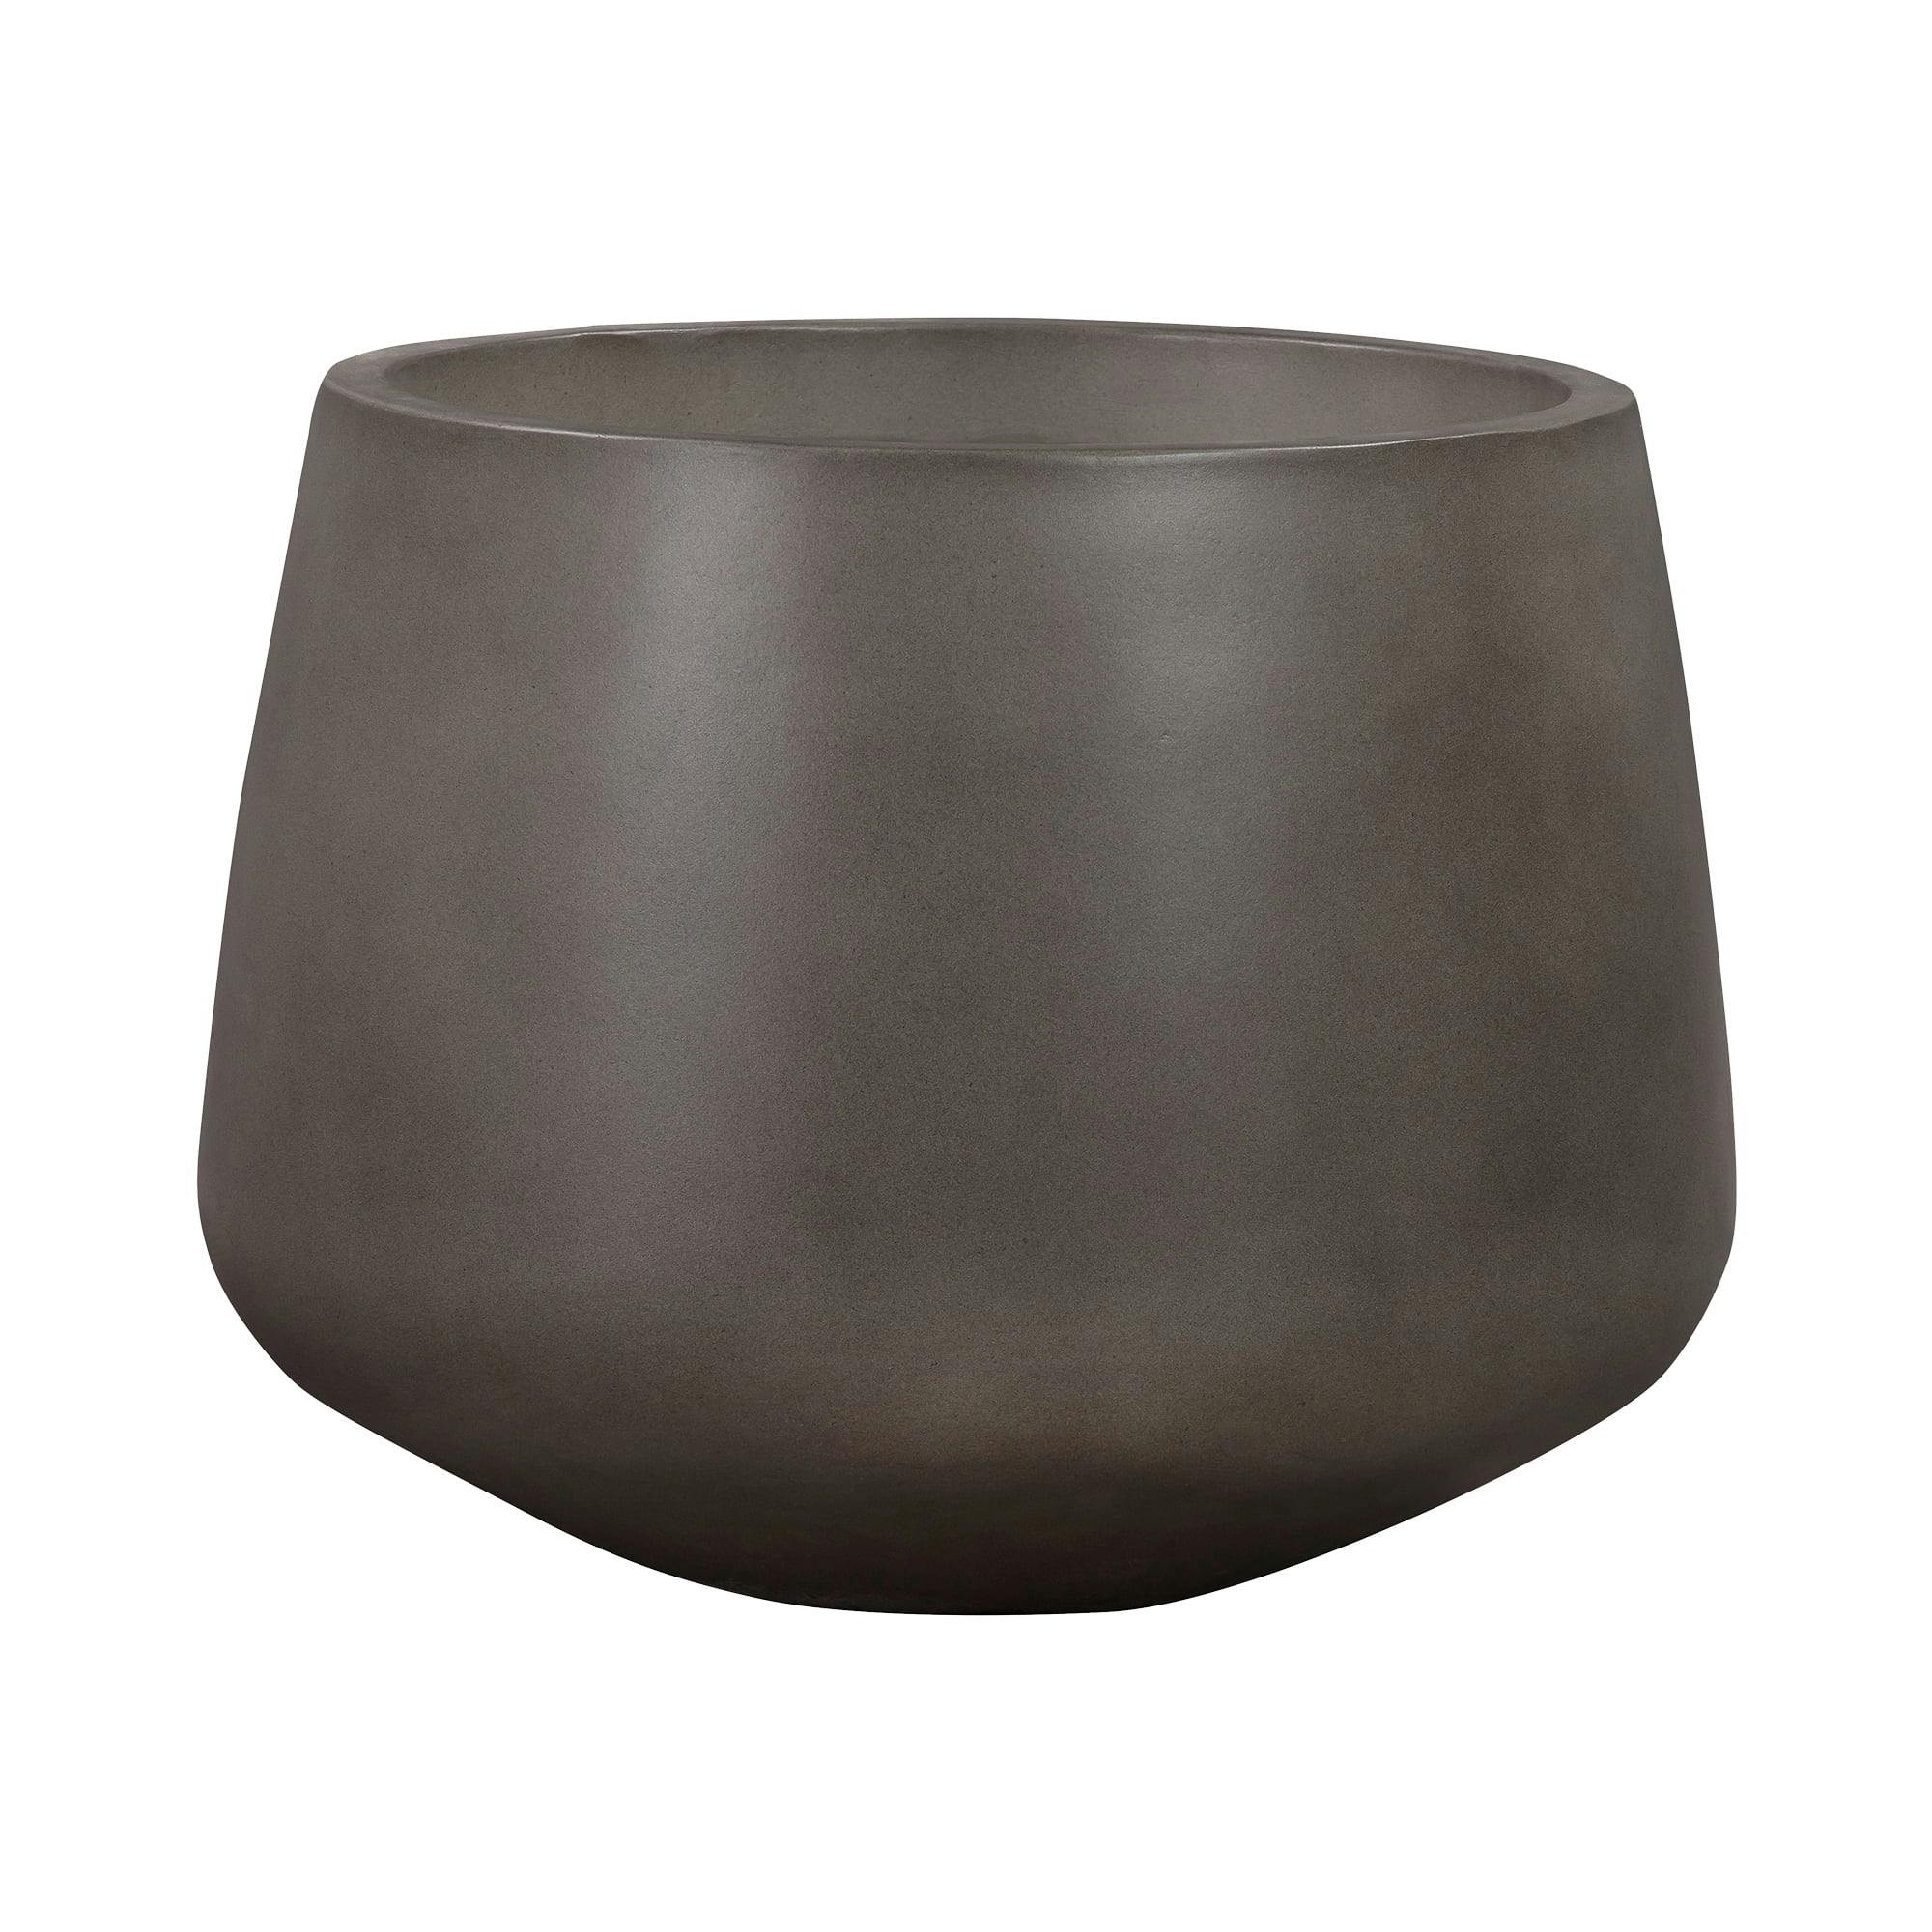 Amethyst 14" Lightweight Concrete Planter for Indoors & Outdoors in Gray